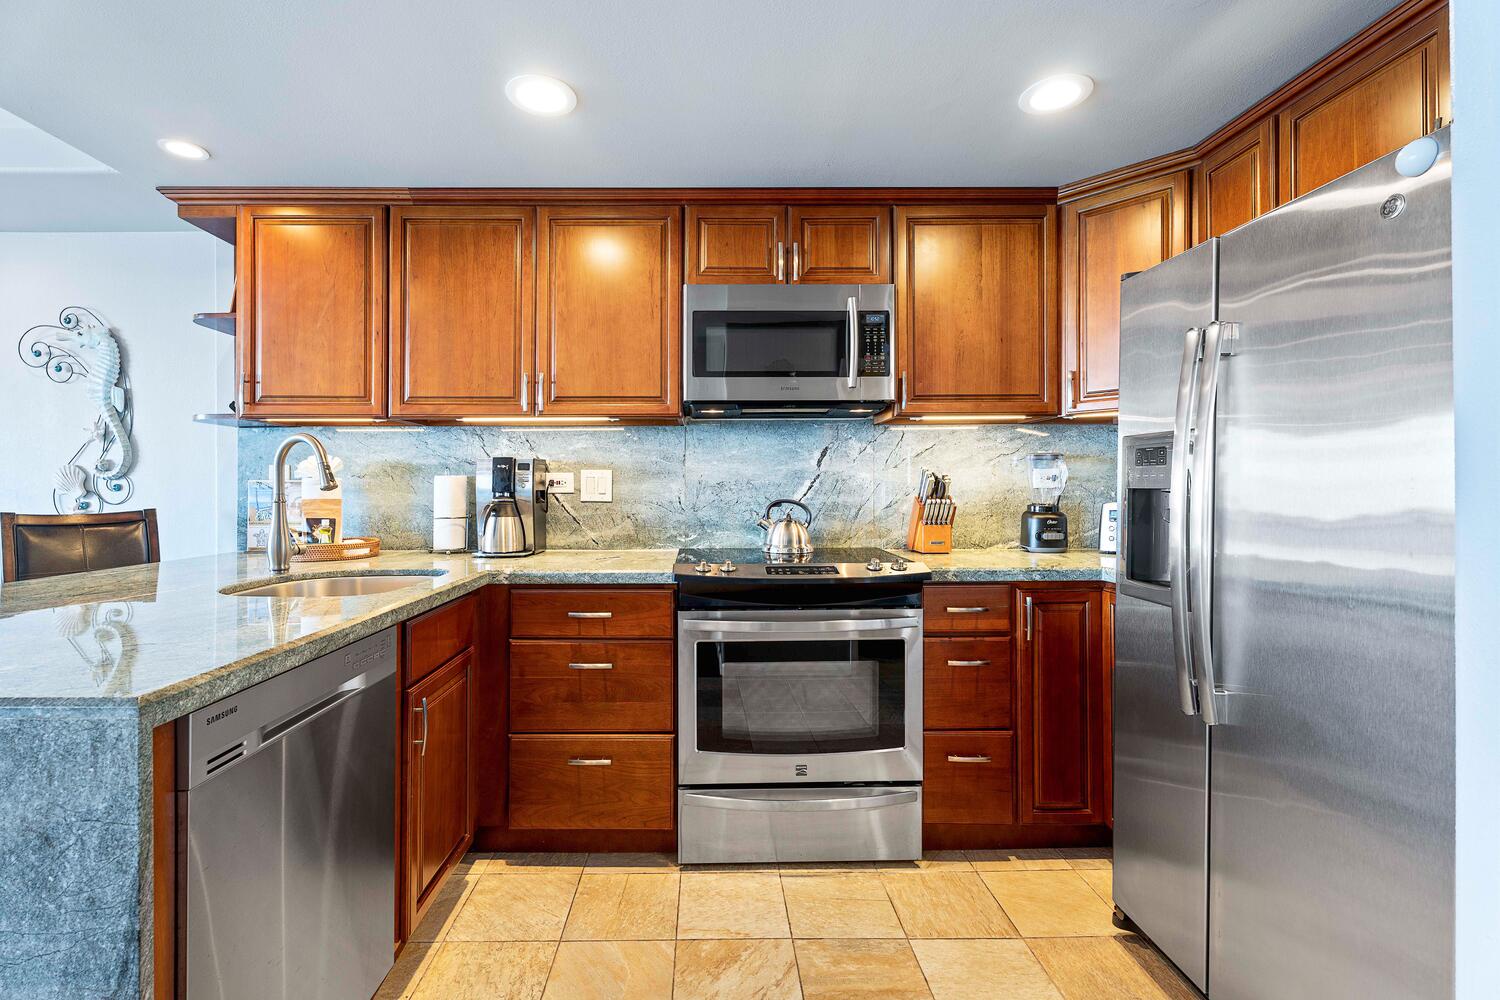 Kailua Kona Vacation Rentals, Kona Alii 403 - Equipped with stainless steel appliances for making meal prep a breeze.